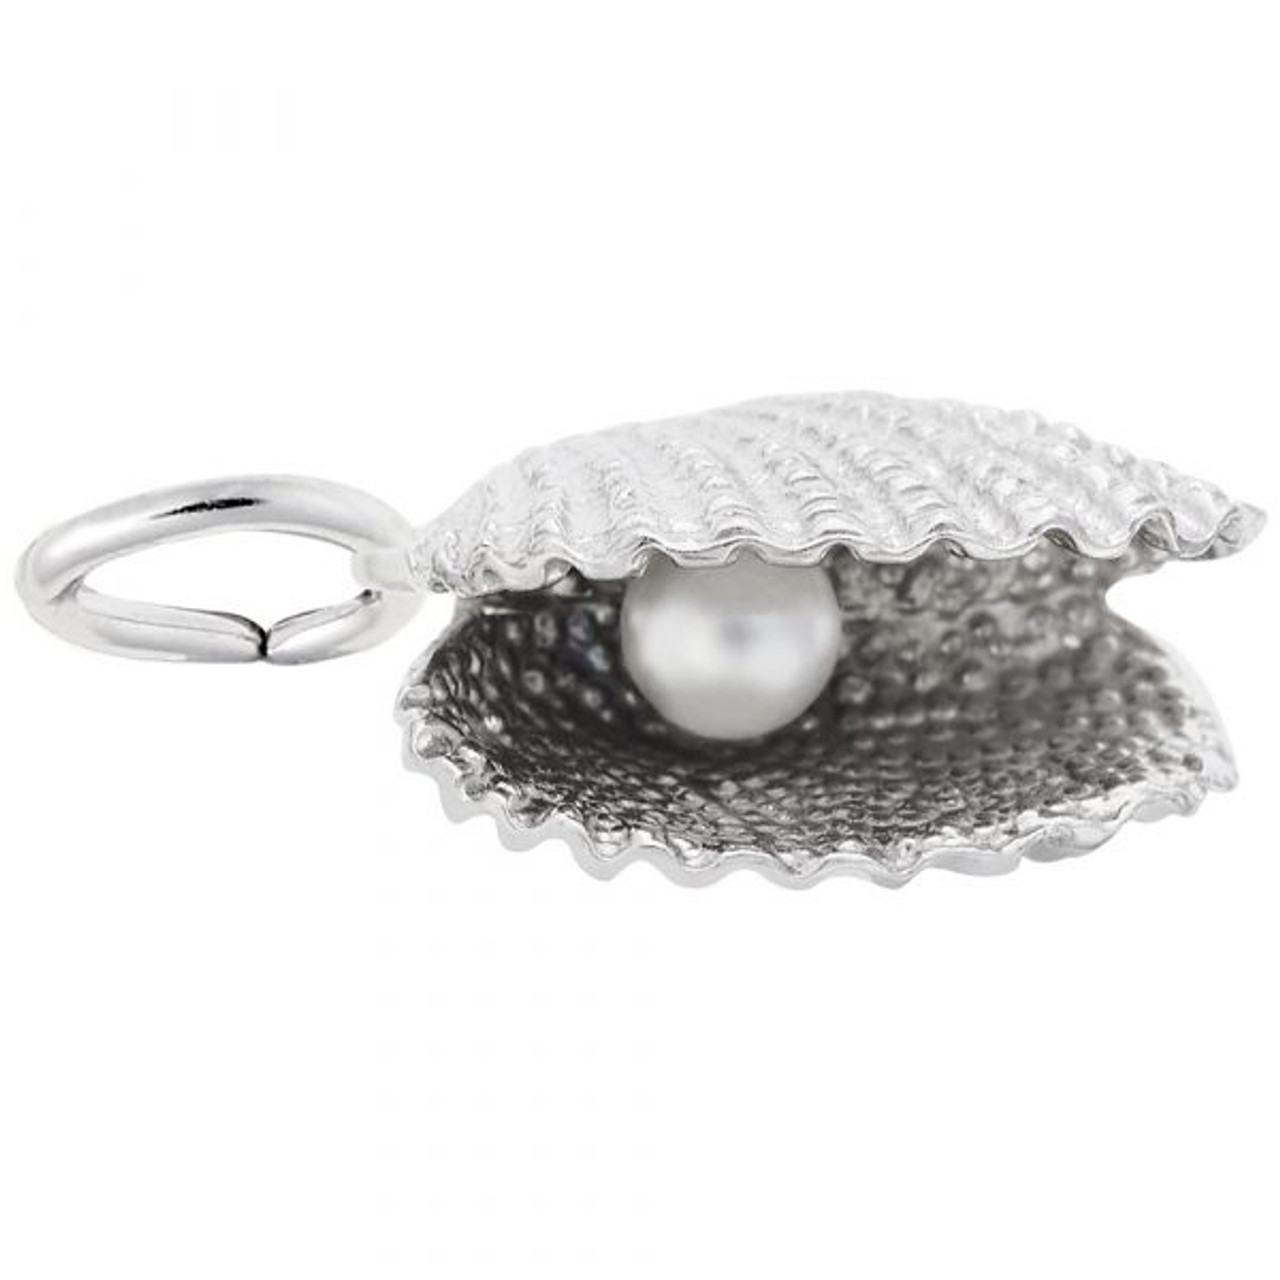 Oyster Shell with Pearl Charm - Sterling Silver and 14k White Gold